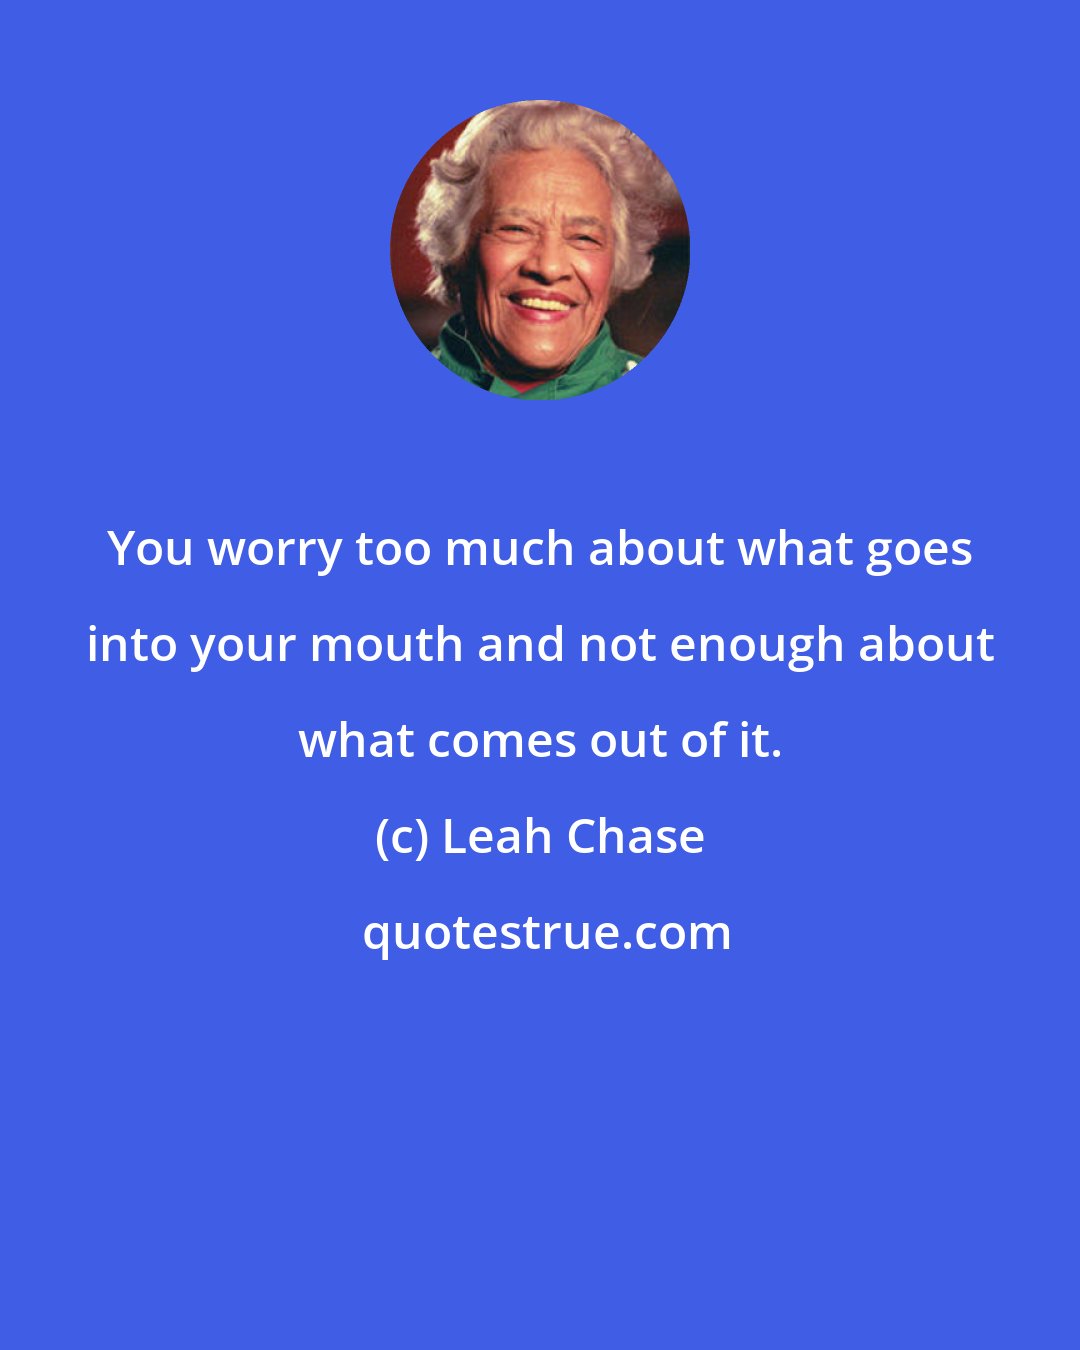 Leah Chase: You worry too much about what goes into your mouth and not enough about what comes out of it.